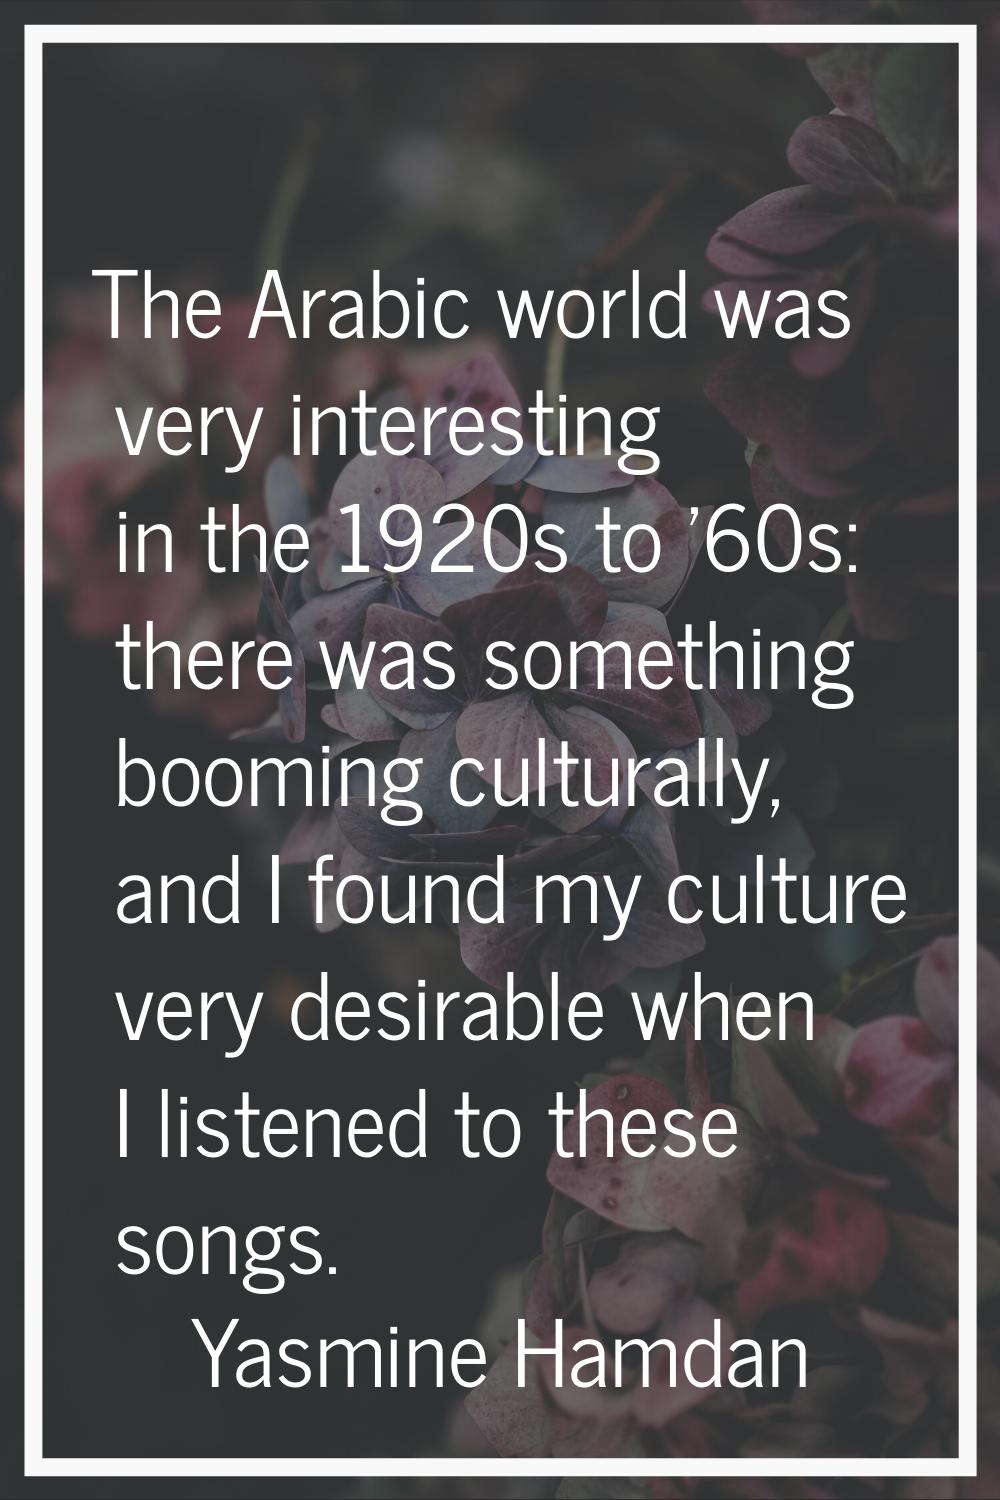 The Arabic world was very interesting in the 1920s to '60s: there was something booming culturally,